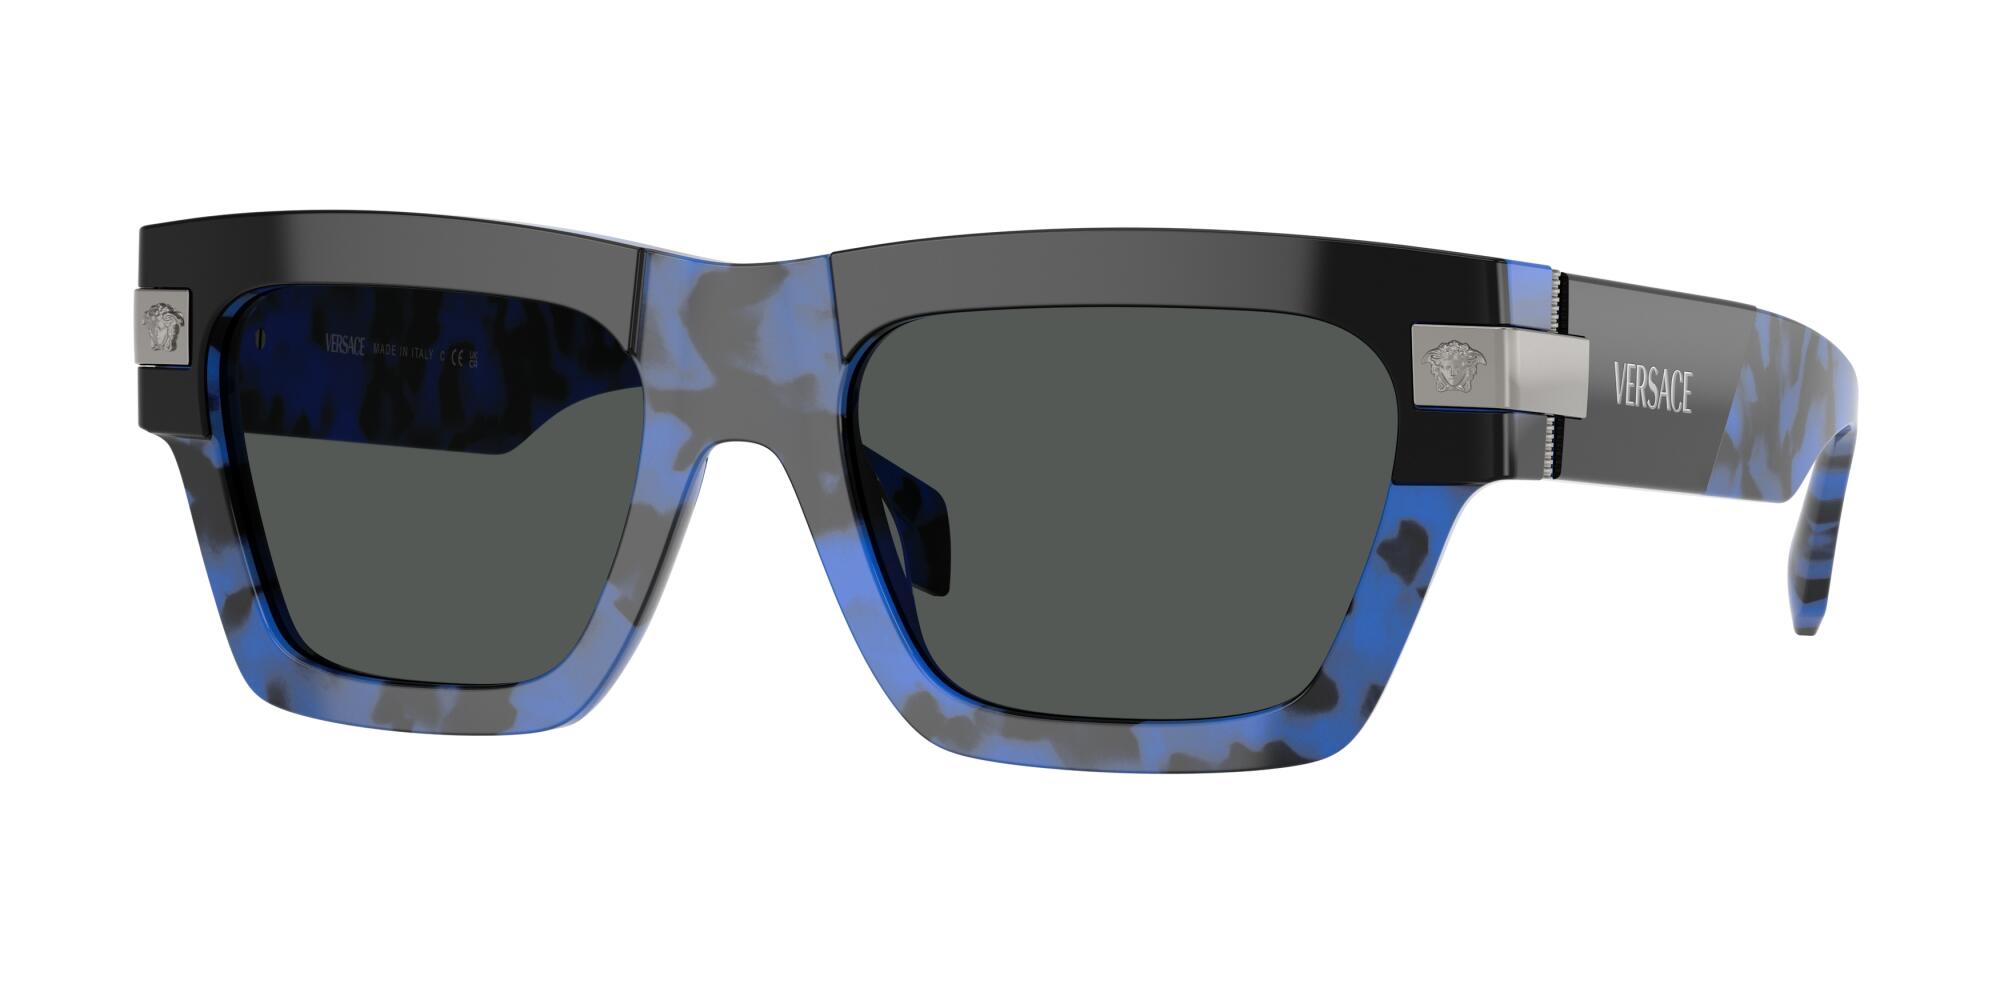 Versace sunglasses in black and blue.